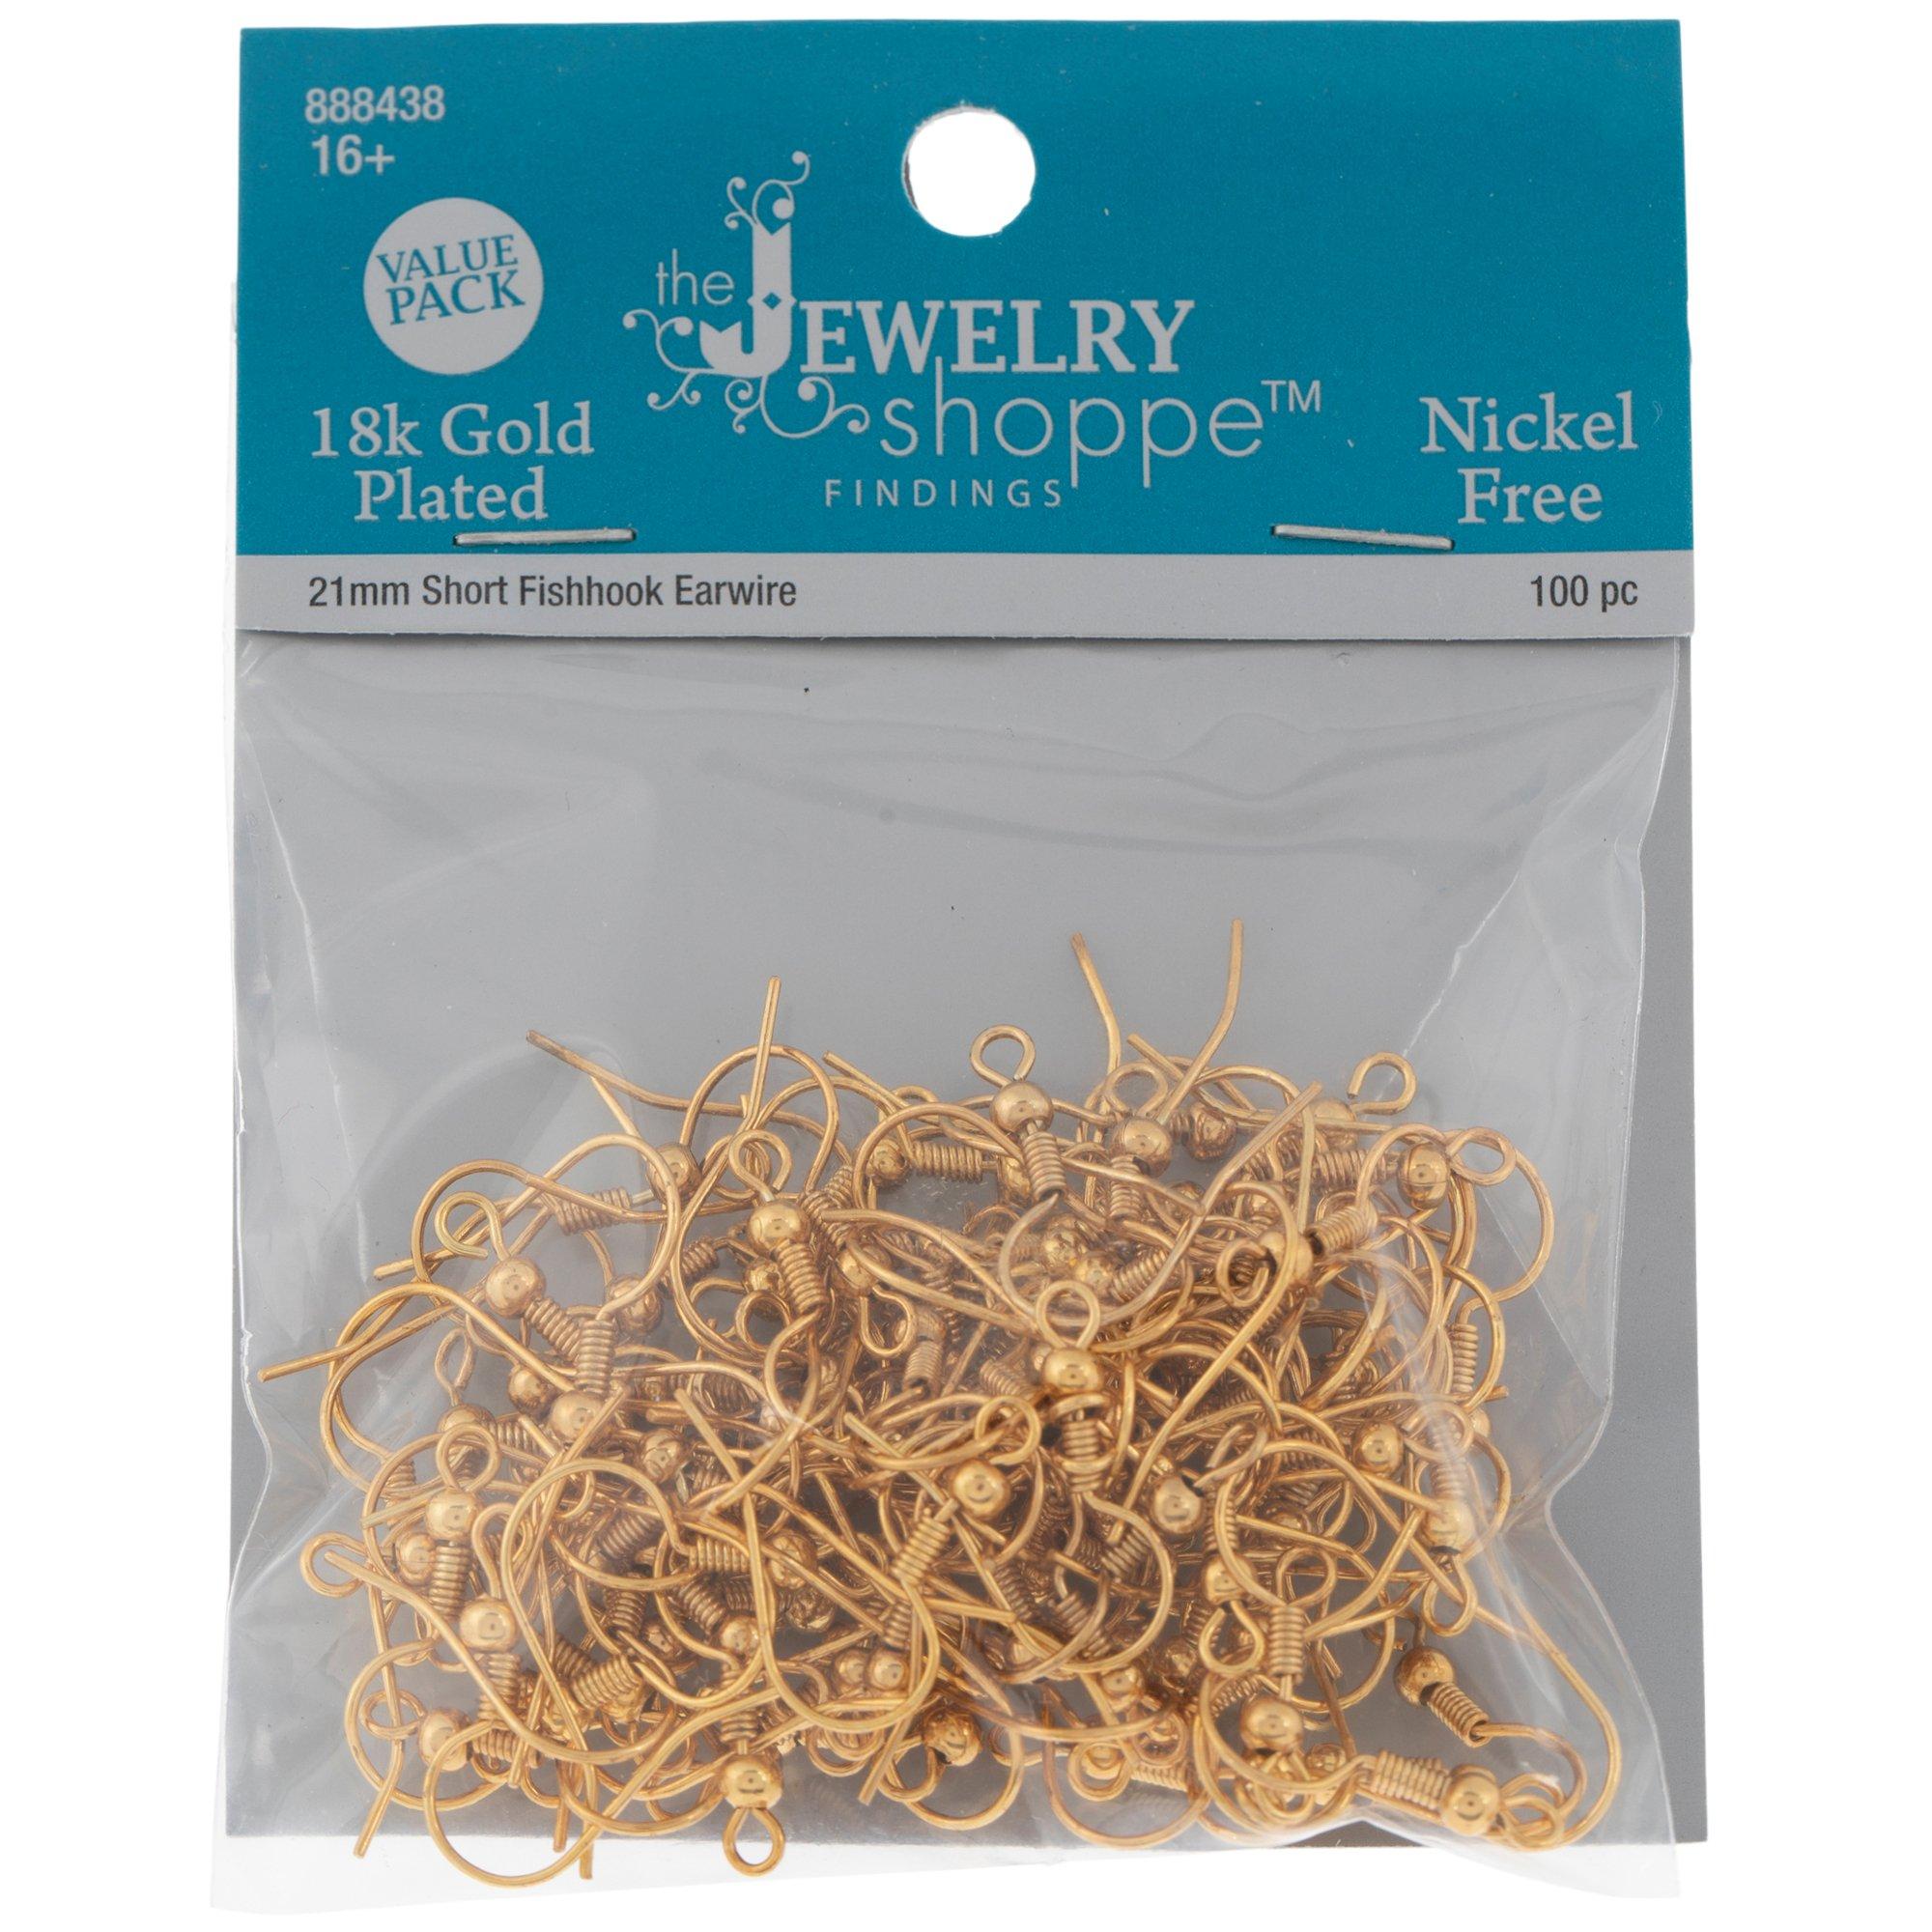 18K Gold Plated Fishhook Earwire Value Pack - 21mm, Hobby Lobby